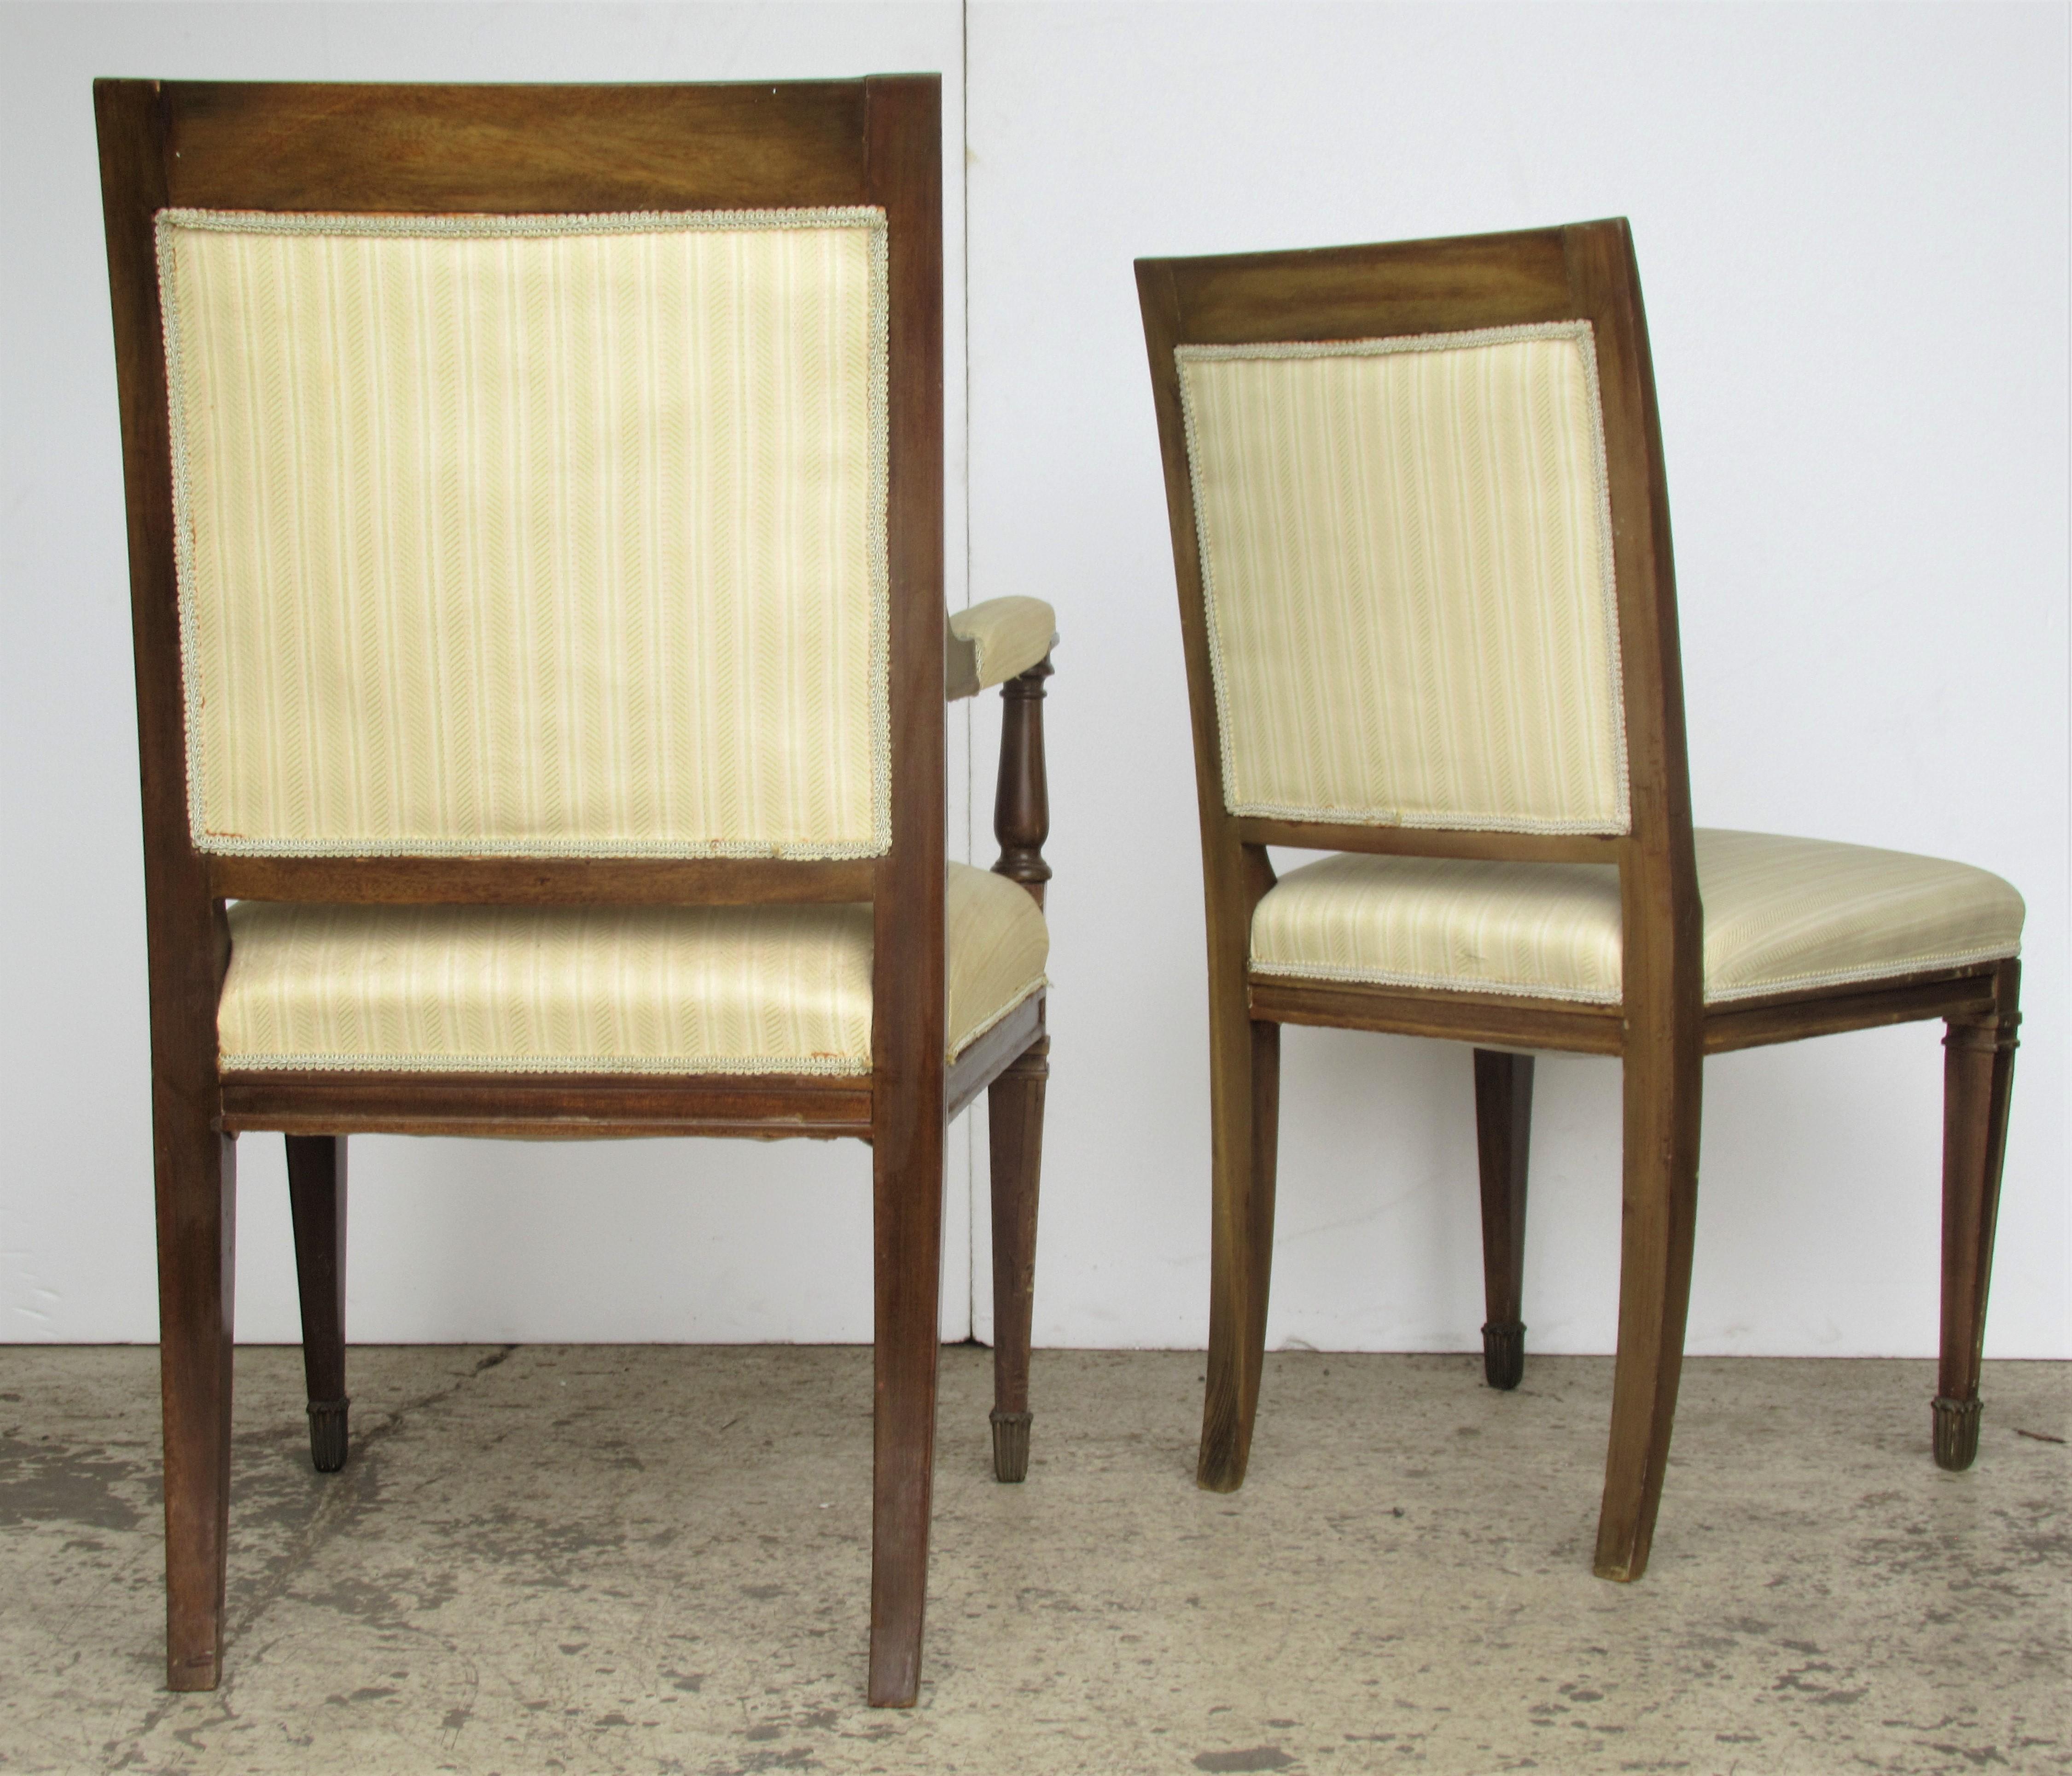 A matched set of ten French Empire style chairs with finely detailed brass metal  ormolu mounts at backs, legs and feet - the wood frames with aged original old finish . There are two armchairs and eight side chairs. Side chairs measure 36